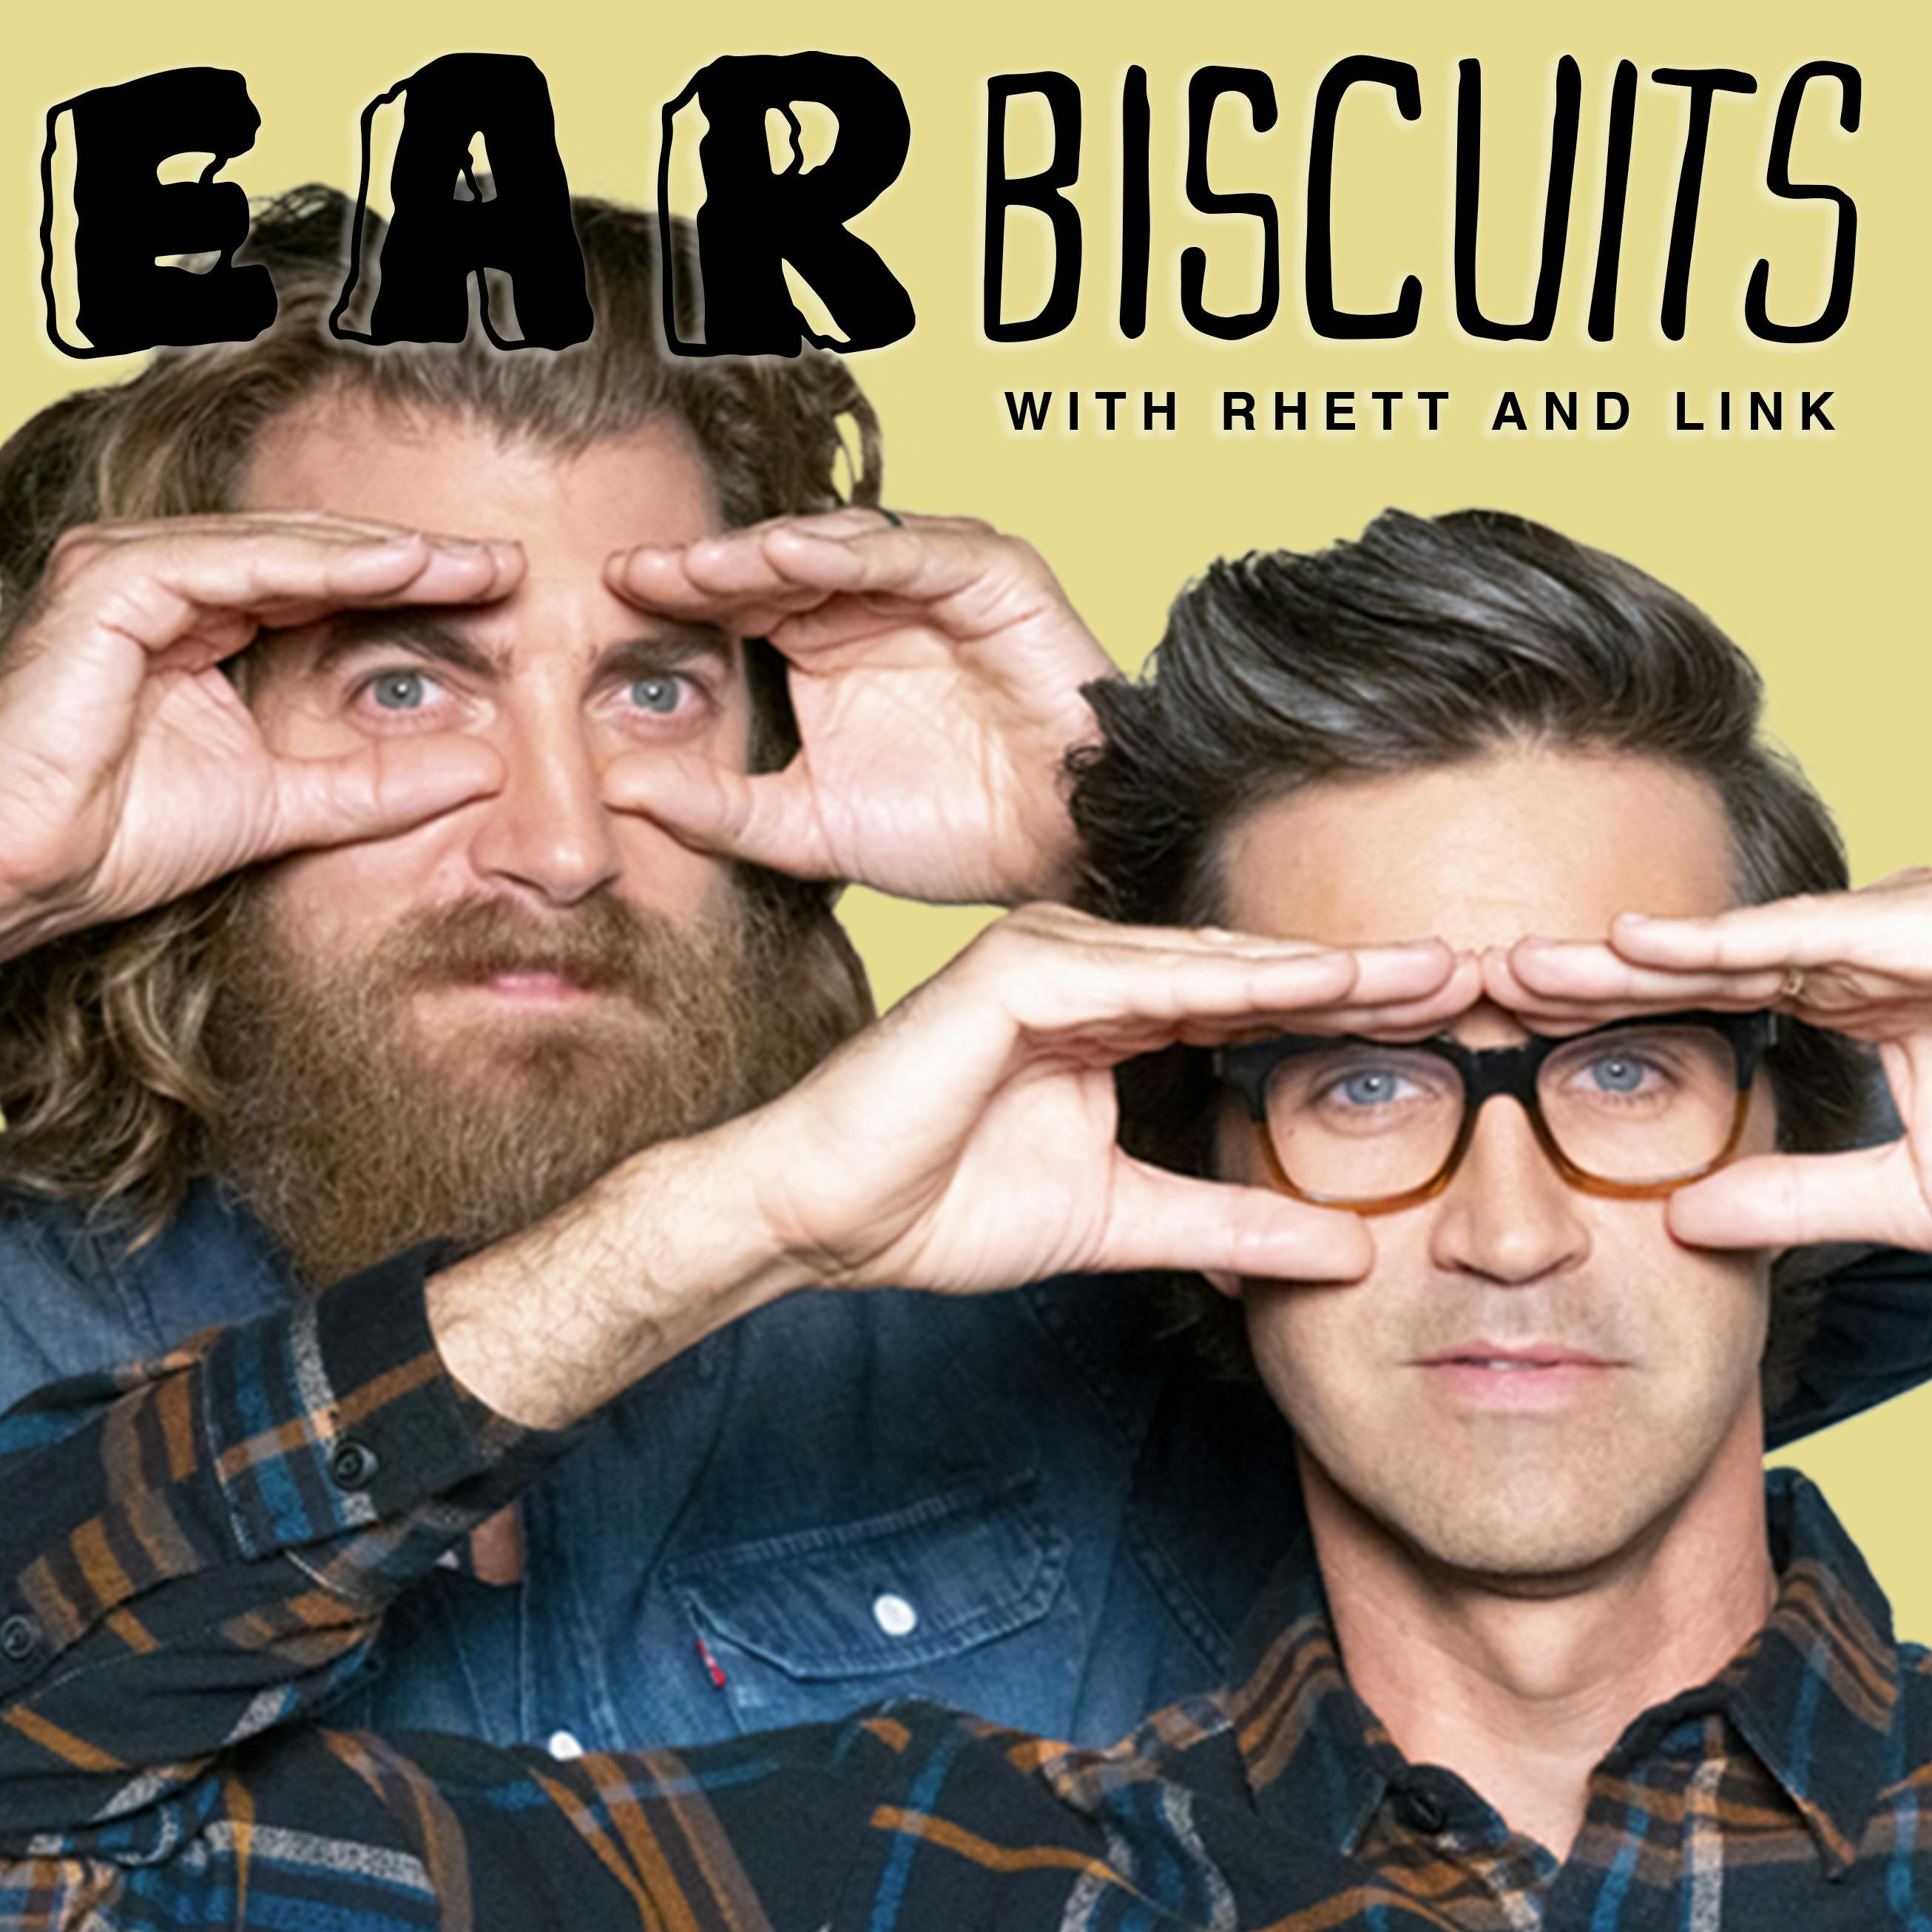 Ear Biscuits - Podcast Addict